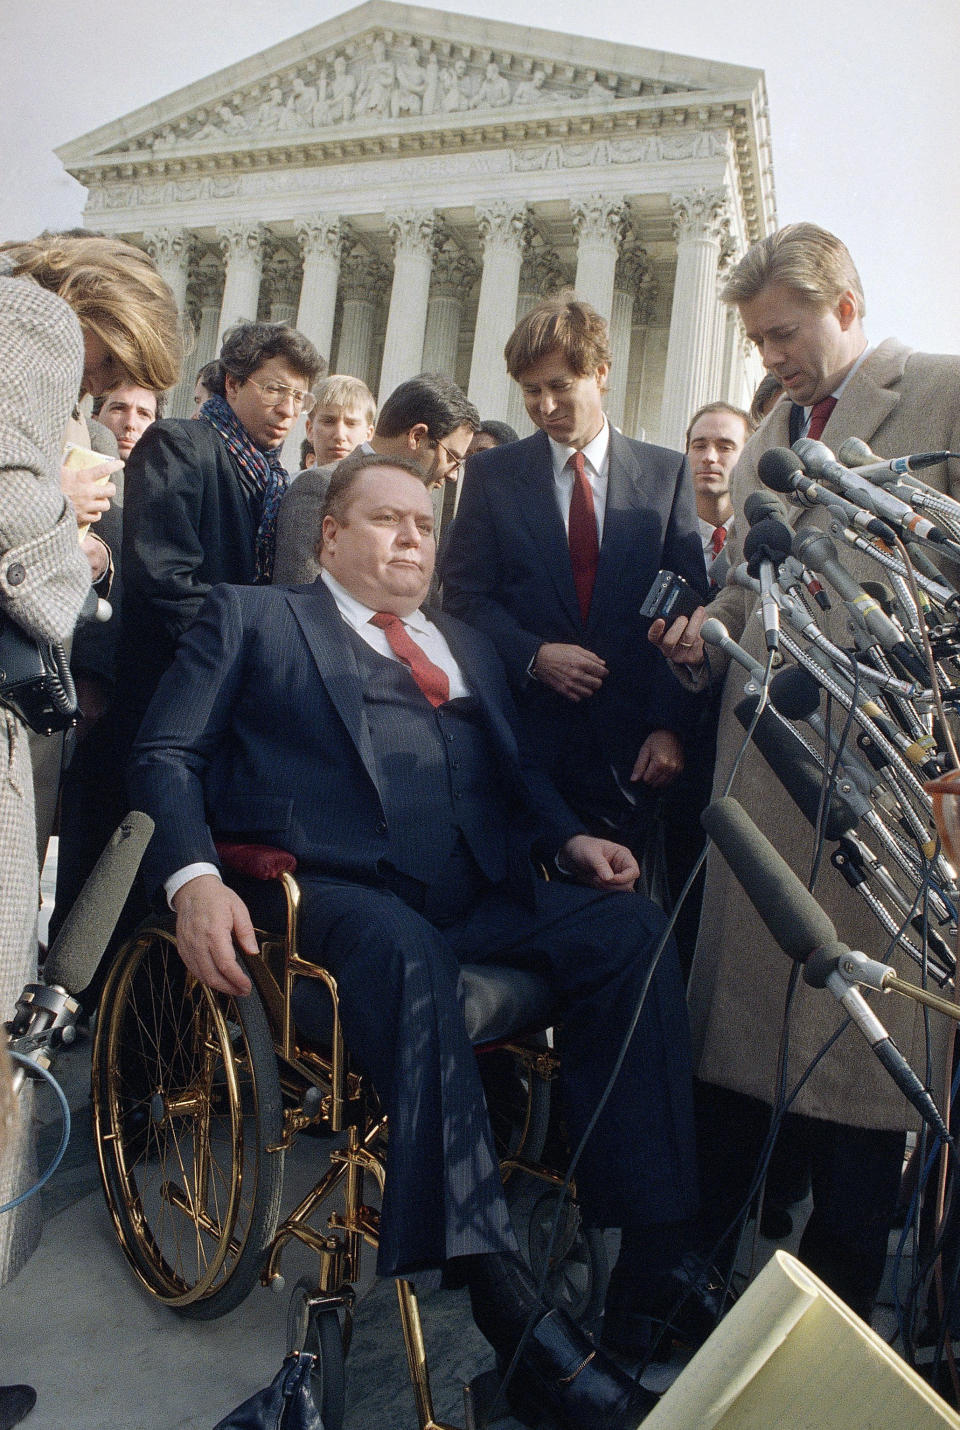 FILE - "Hustler" magazine publisher Larry Flynt leave the Supreme Court building in Washington on Dec. 3, 1987, after a case was heard. Flynt, who turned "Hustler" magazine into an adult entertainment empire while championing First Amendment rights, has died at age 78. His nephew, Jimmy Flynt Jr., told The Associated Press that Flynt died Wednesday, Feb. 10, 2021, of heart failure at his Hollywood Hills home in Los Angeles. (AP Photo/Charles Tasnadi, File)